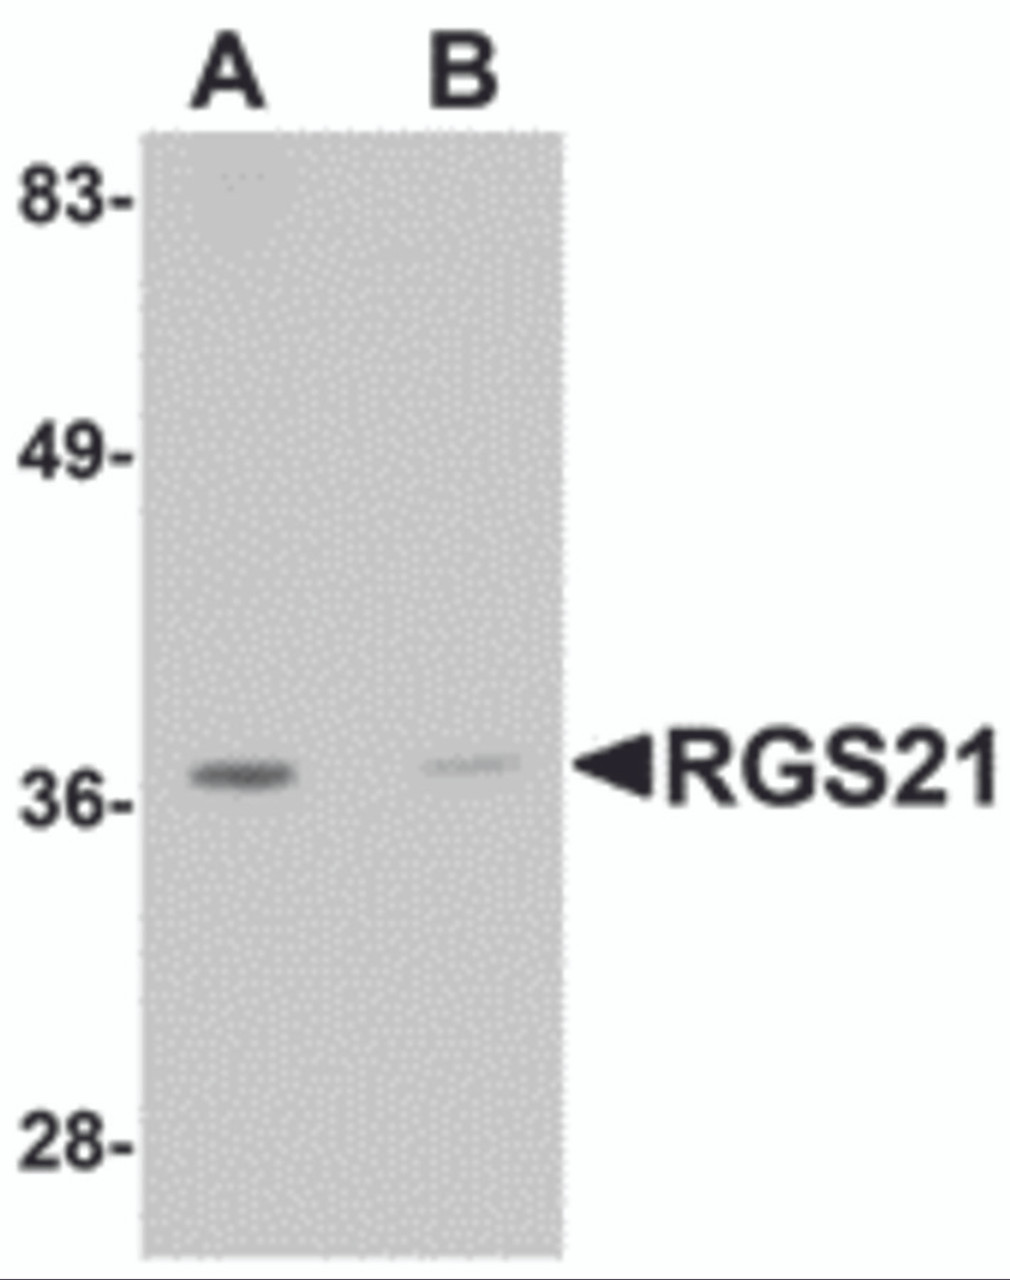 Western blot analysis of RGS21 in HepG2 cell lysate with RGS21 antibody at 0.5 &#956;g/mL in (A) the absence and (B) the presence of blocking peptide.